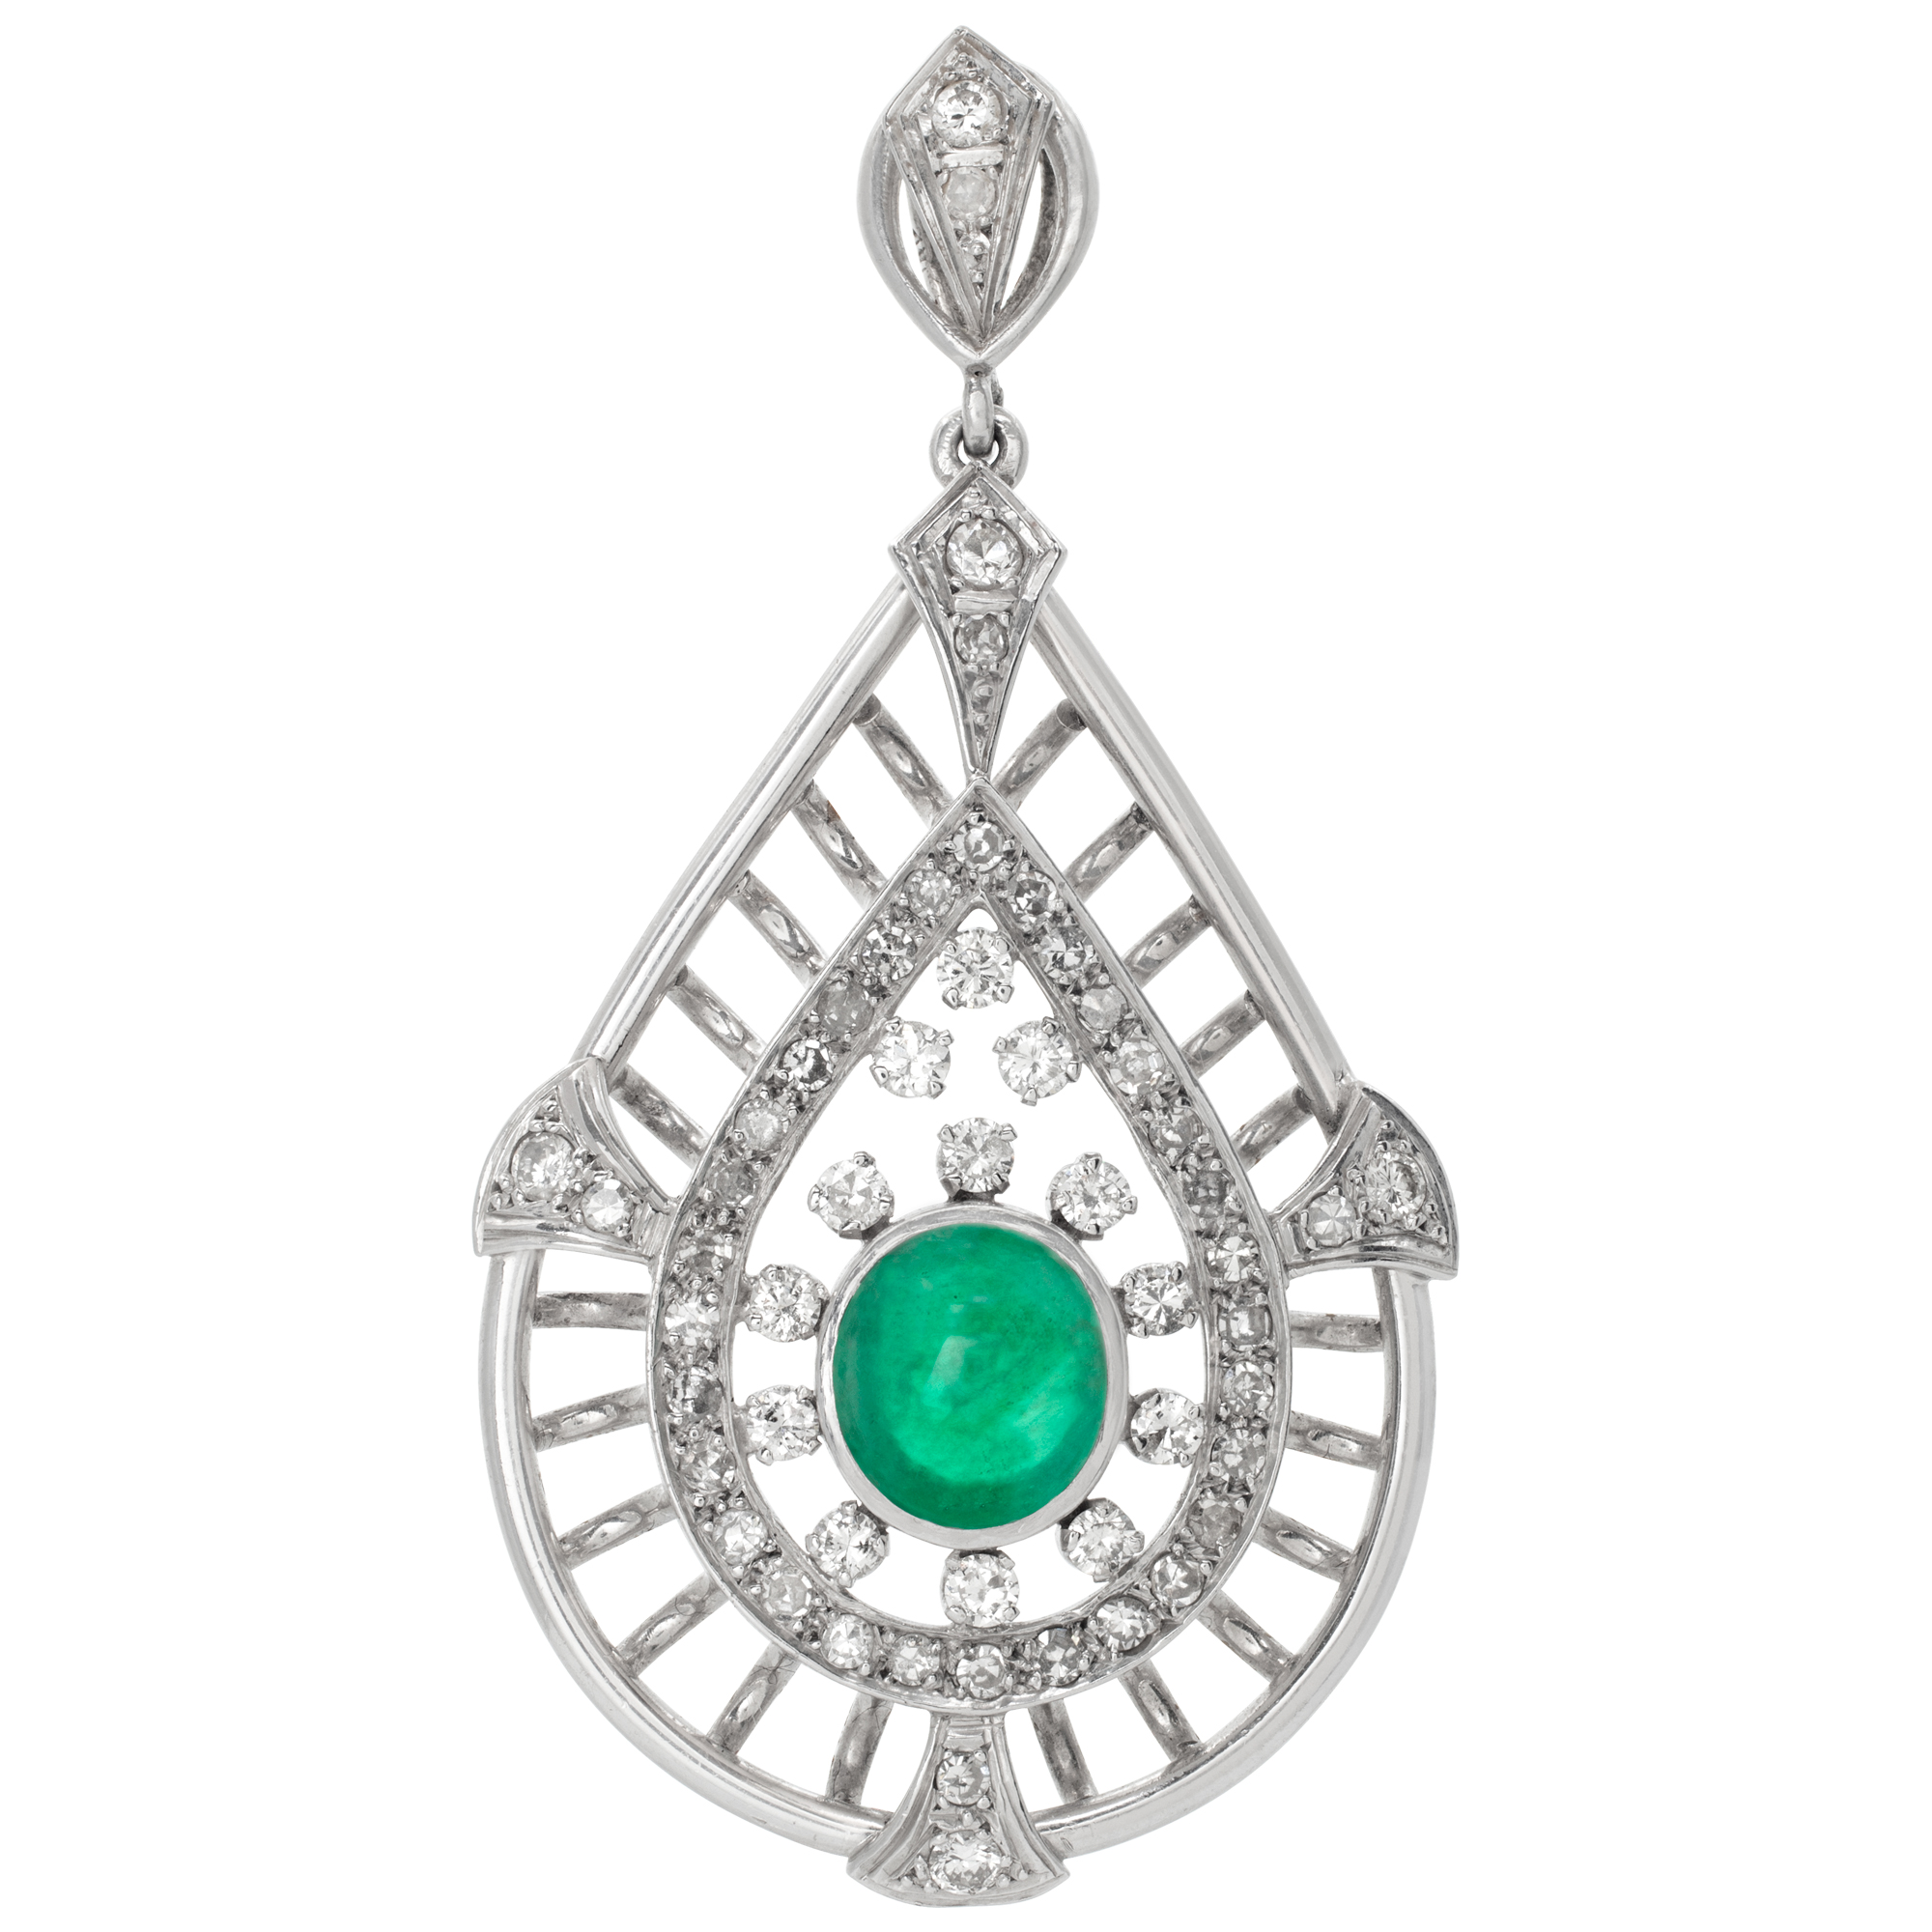 18k white gold tear drop brooch with center 2.0 ct cabachon emerald and approx 2 cts in accent diamonds